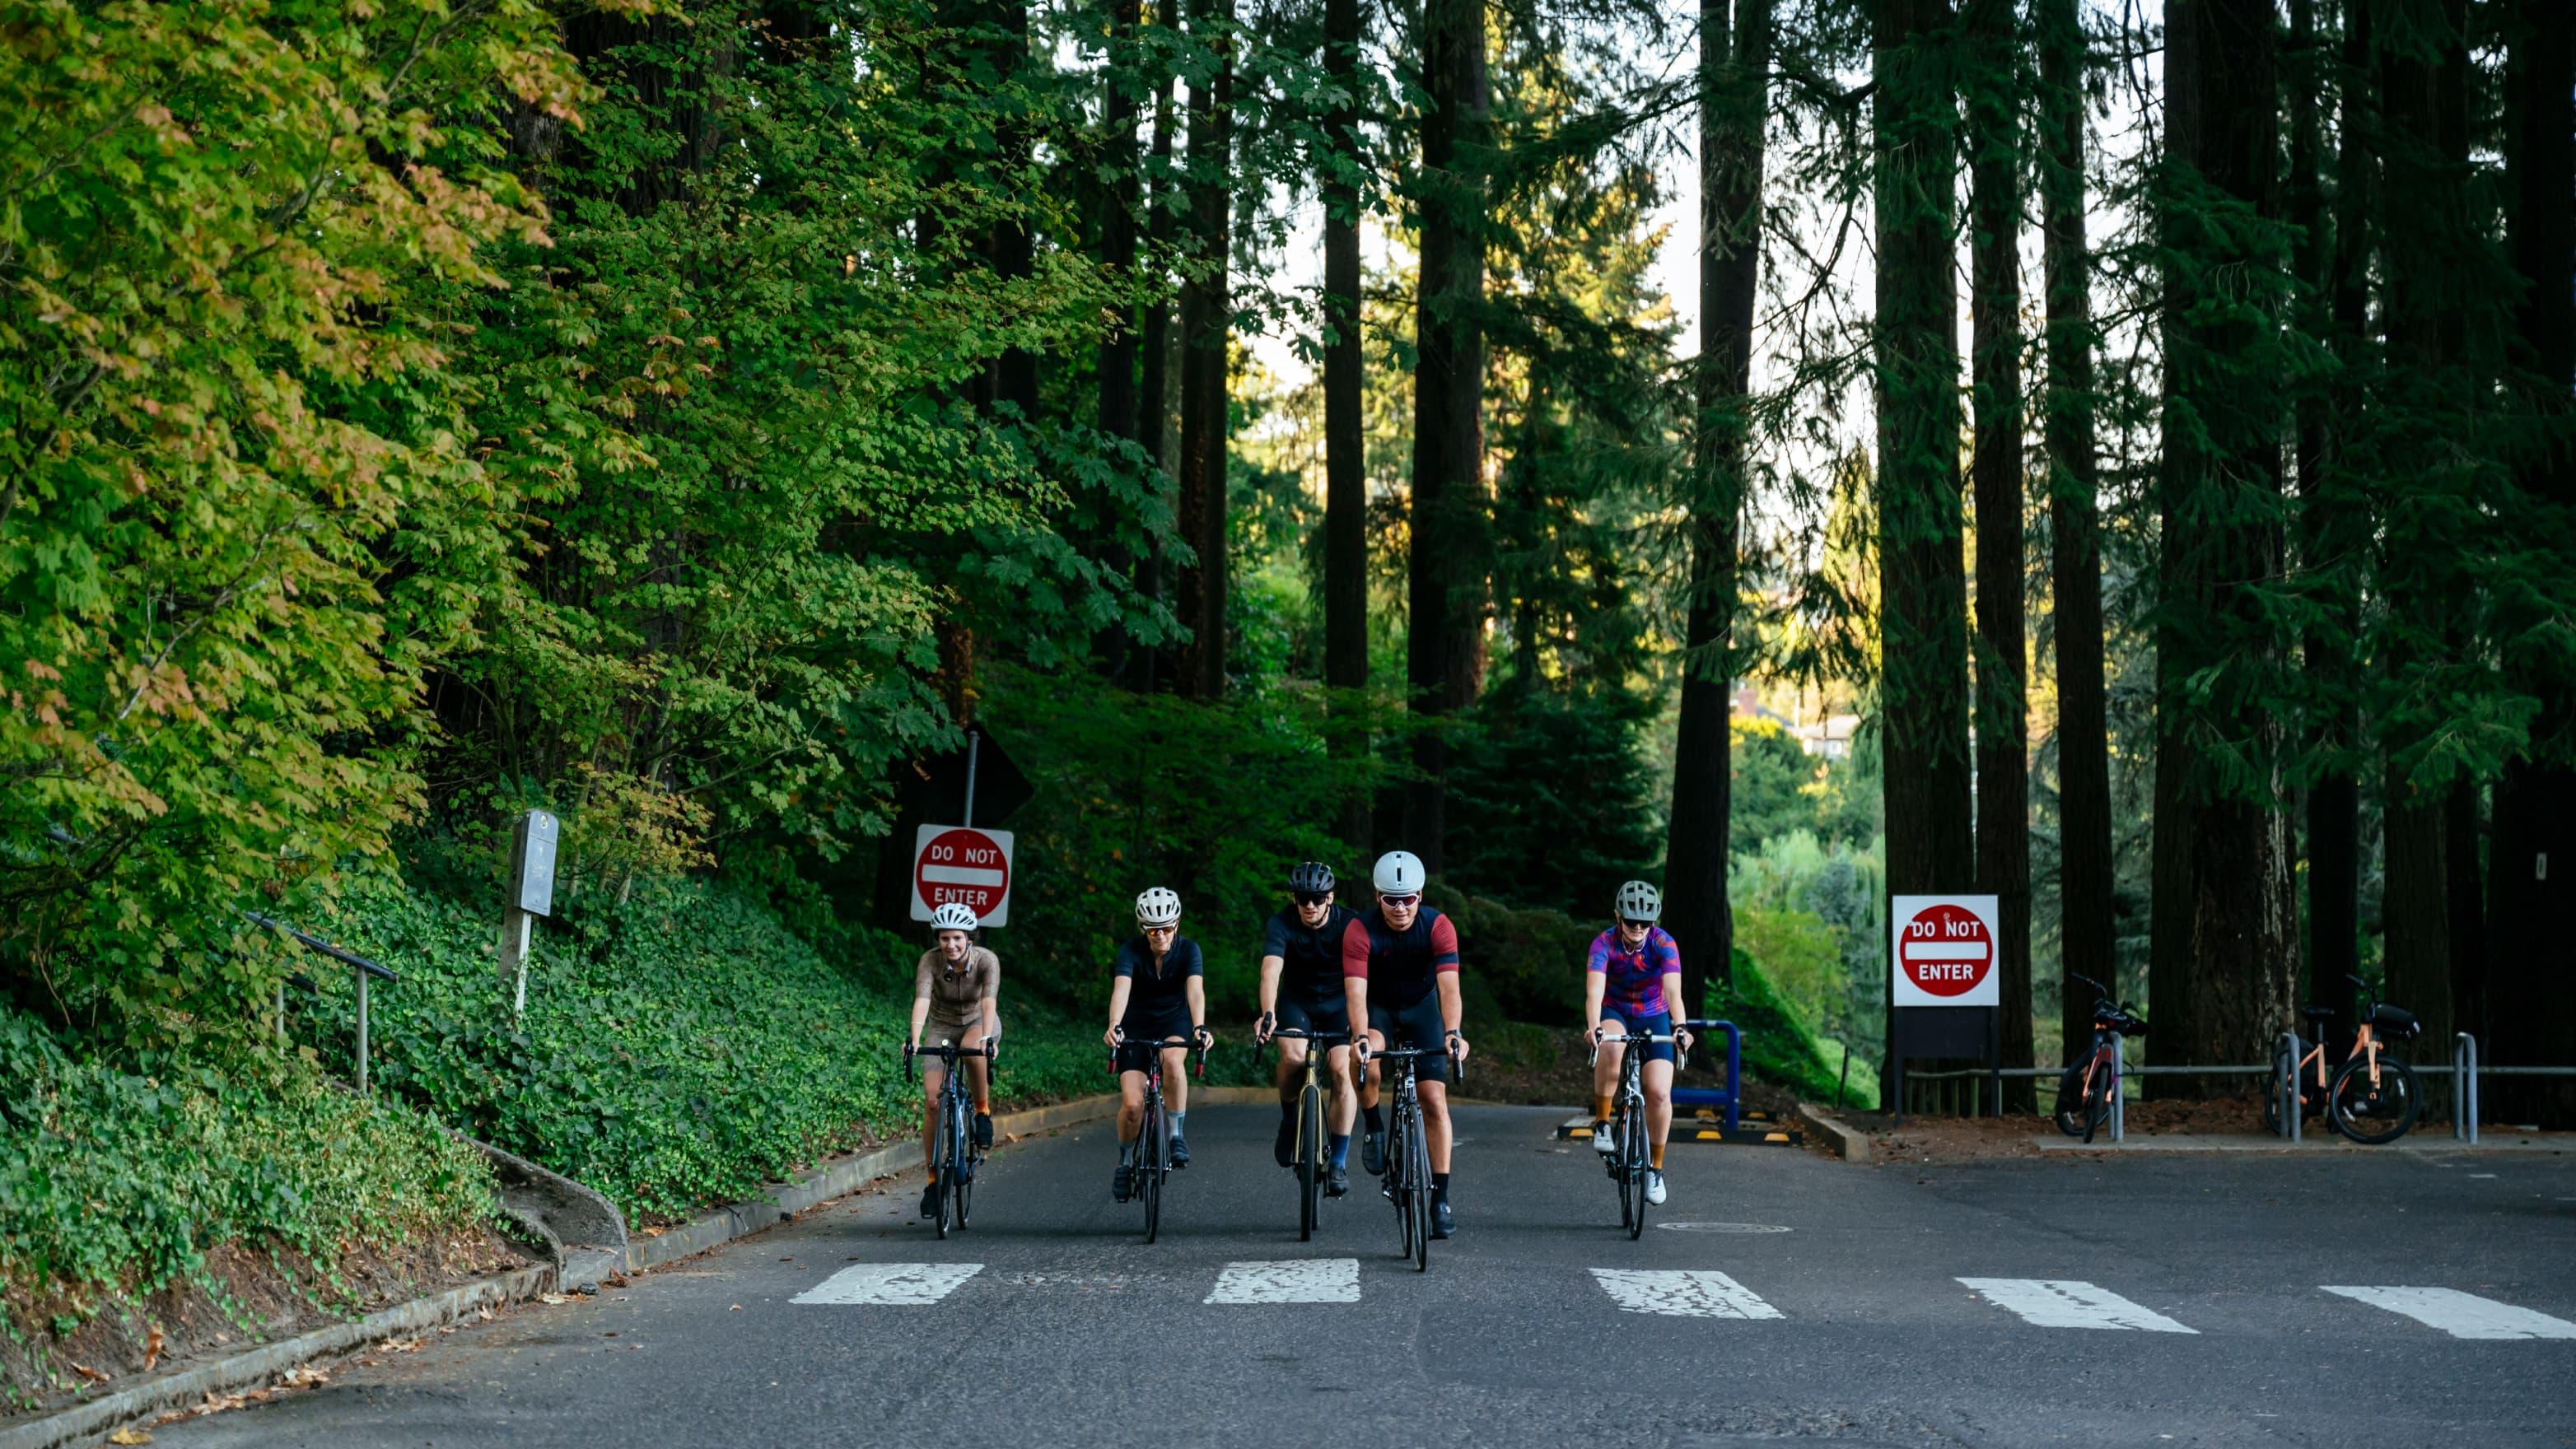 A big group of cyclists rides in the forest